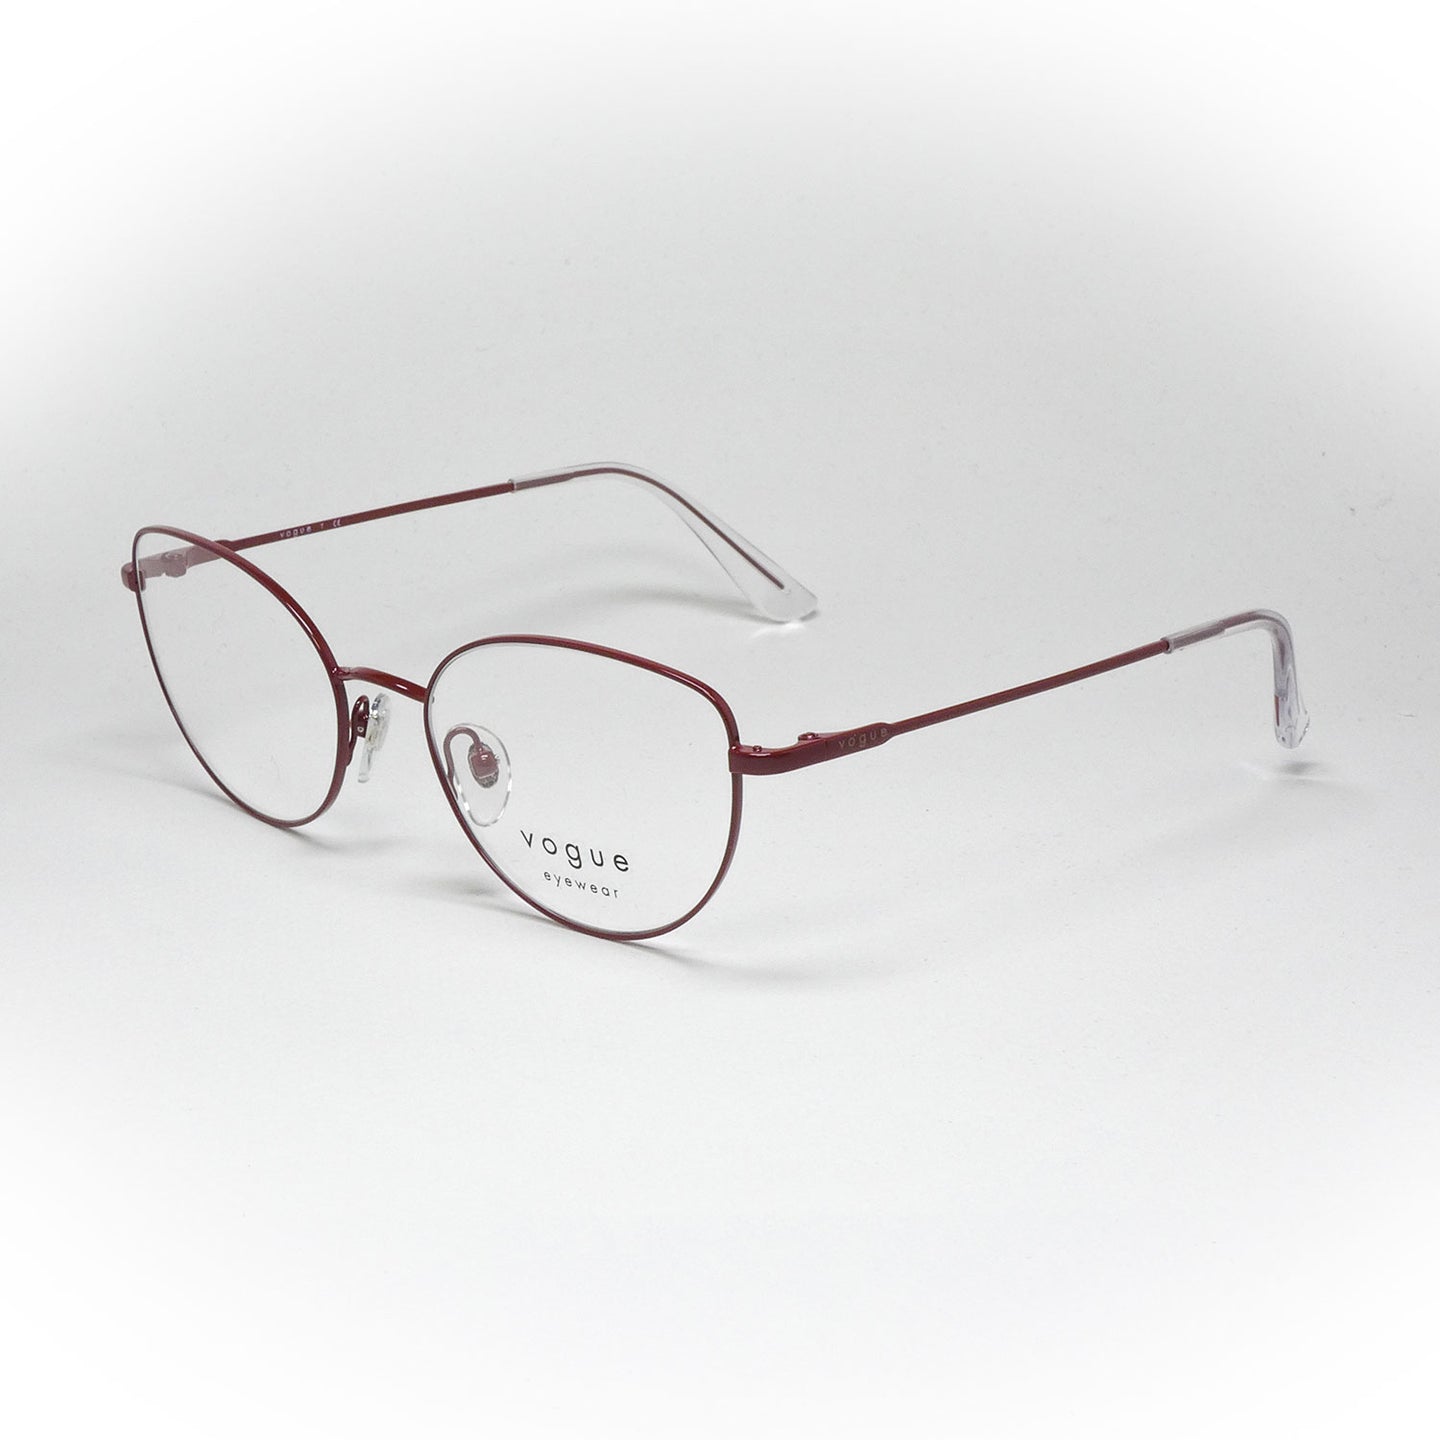 glasses vogue model vo 4128 color 5110 angled view